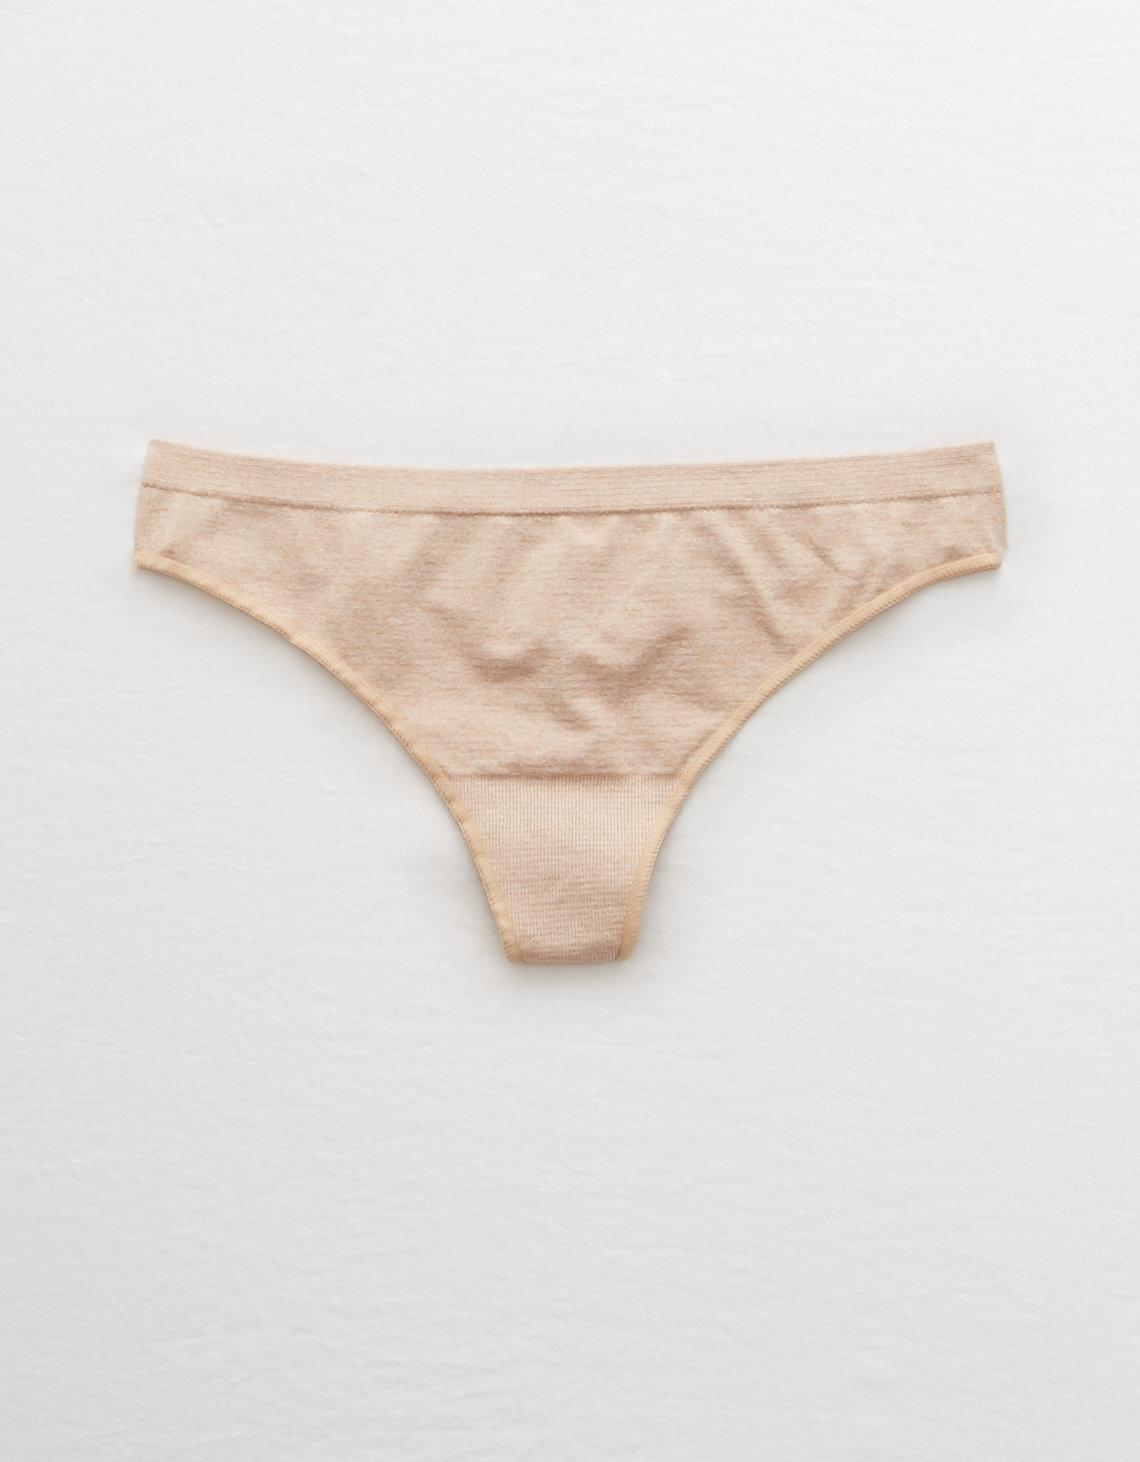 American Eagle Seamless Thong Undie in Natural Nude 